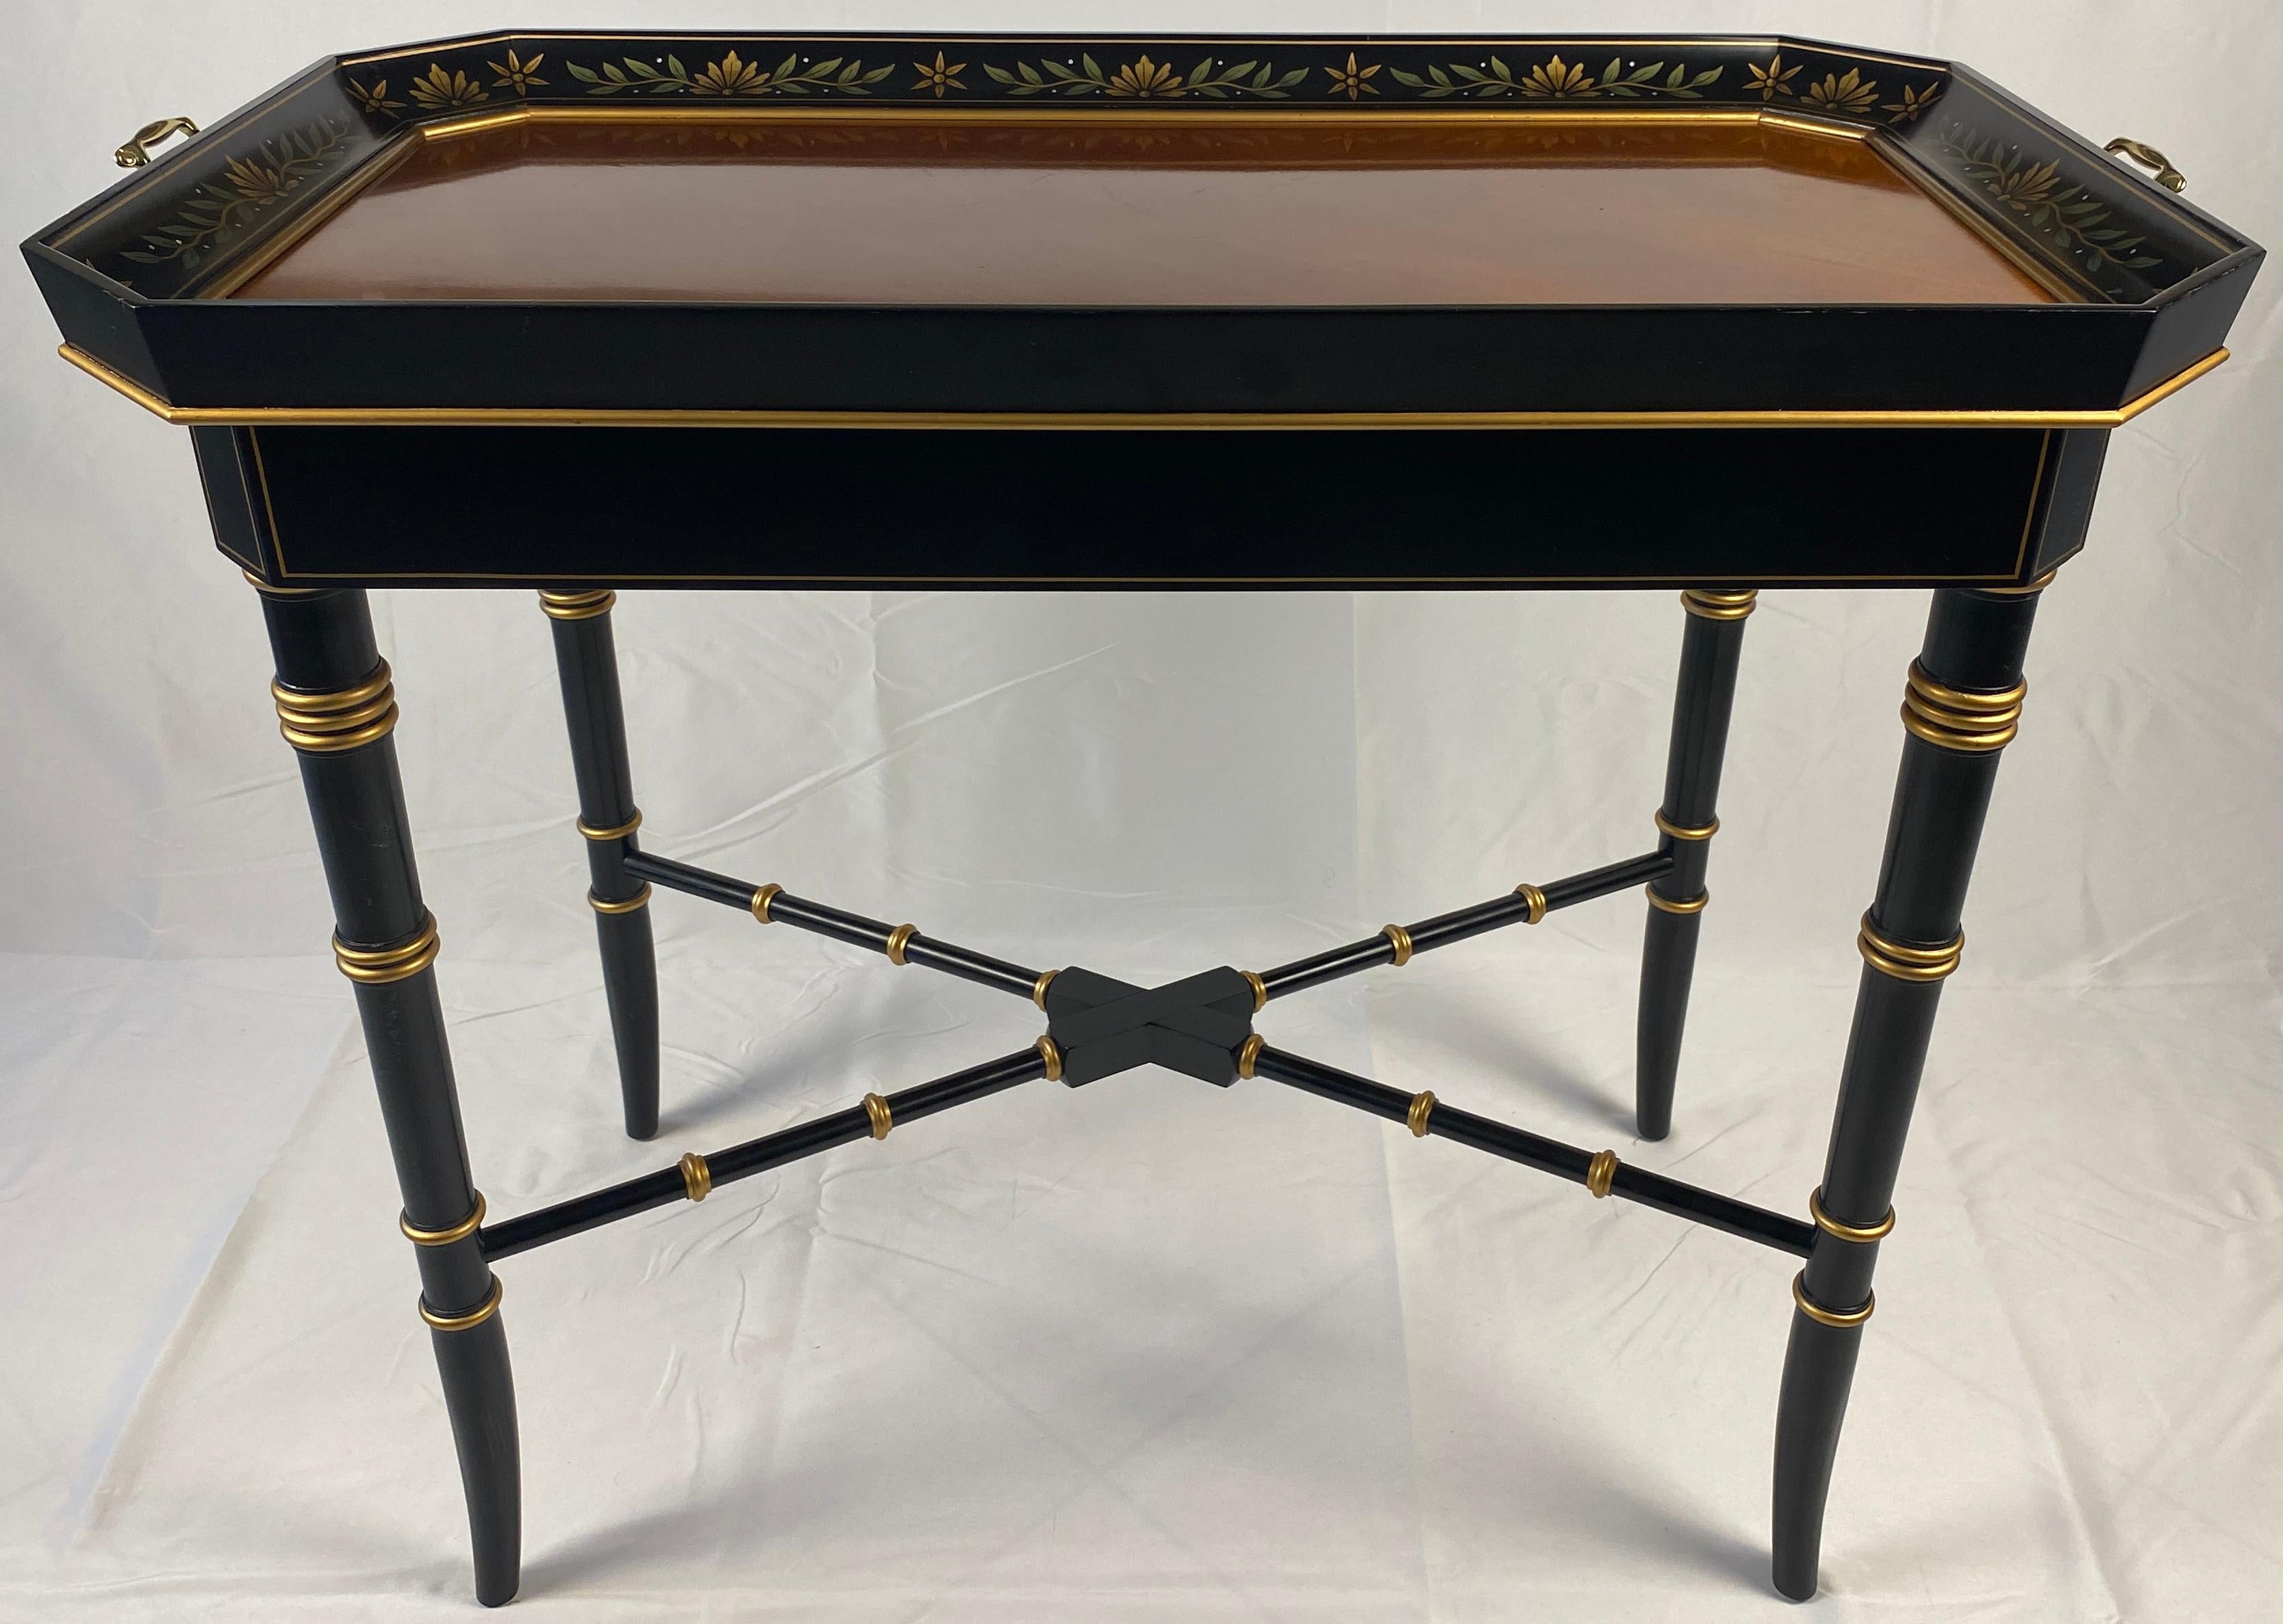 Hand-Painted Black and Gold Wooden Tray Table Bamboo Style Legs For Sale